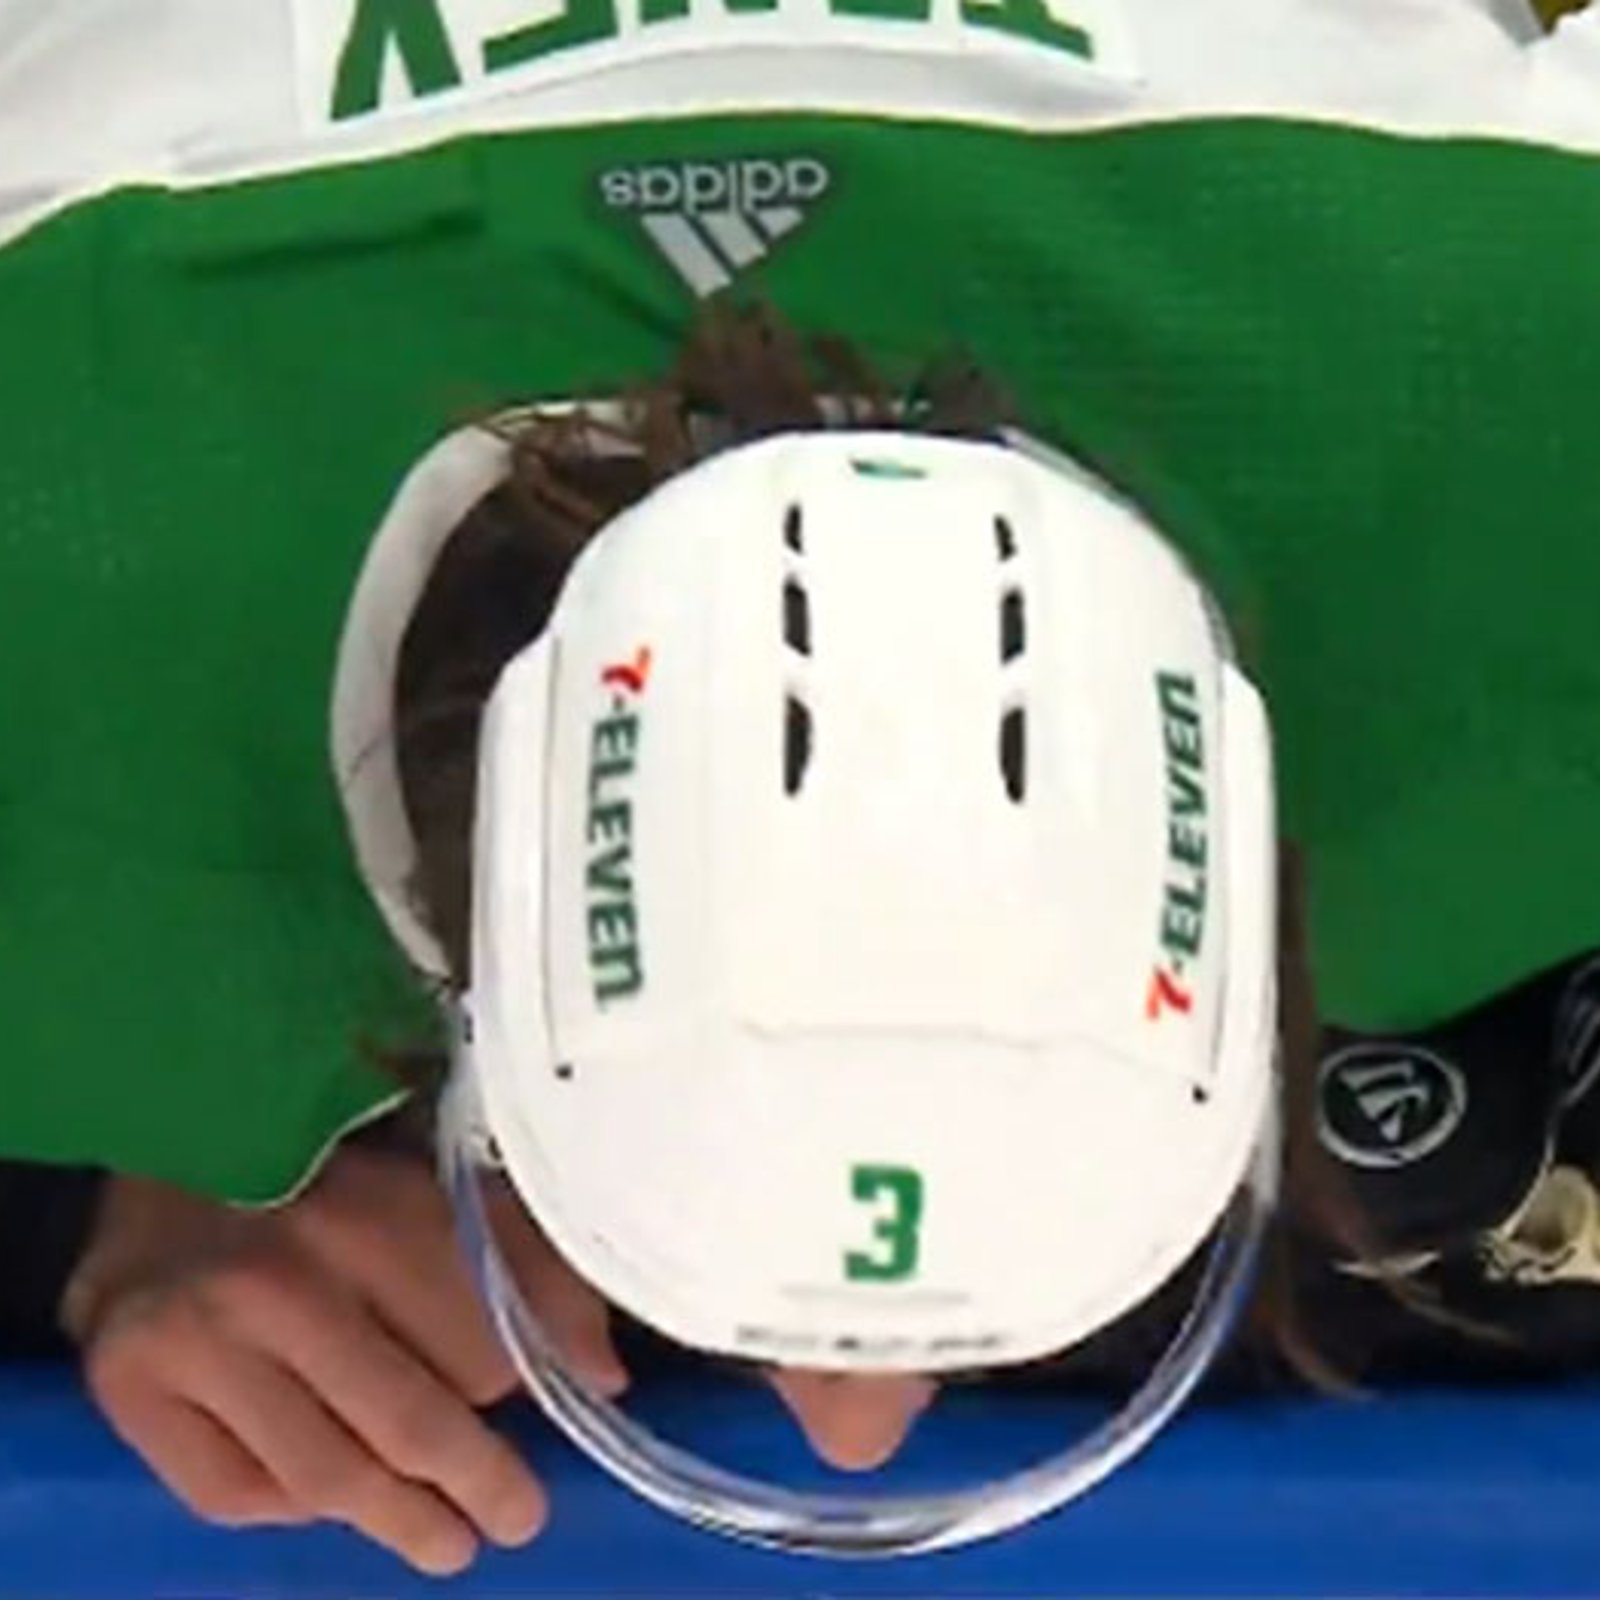 Stars get some bad new on Chris Tanev for Game 5